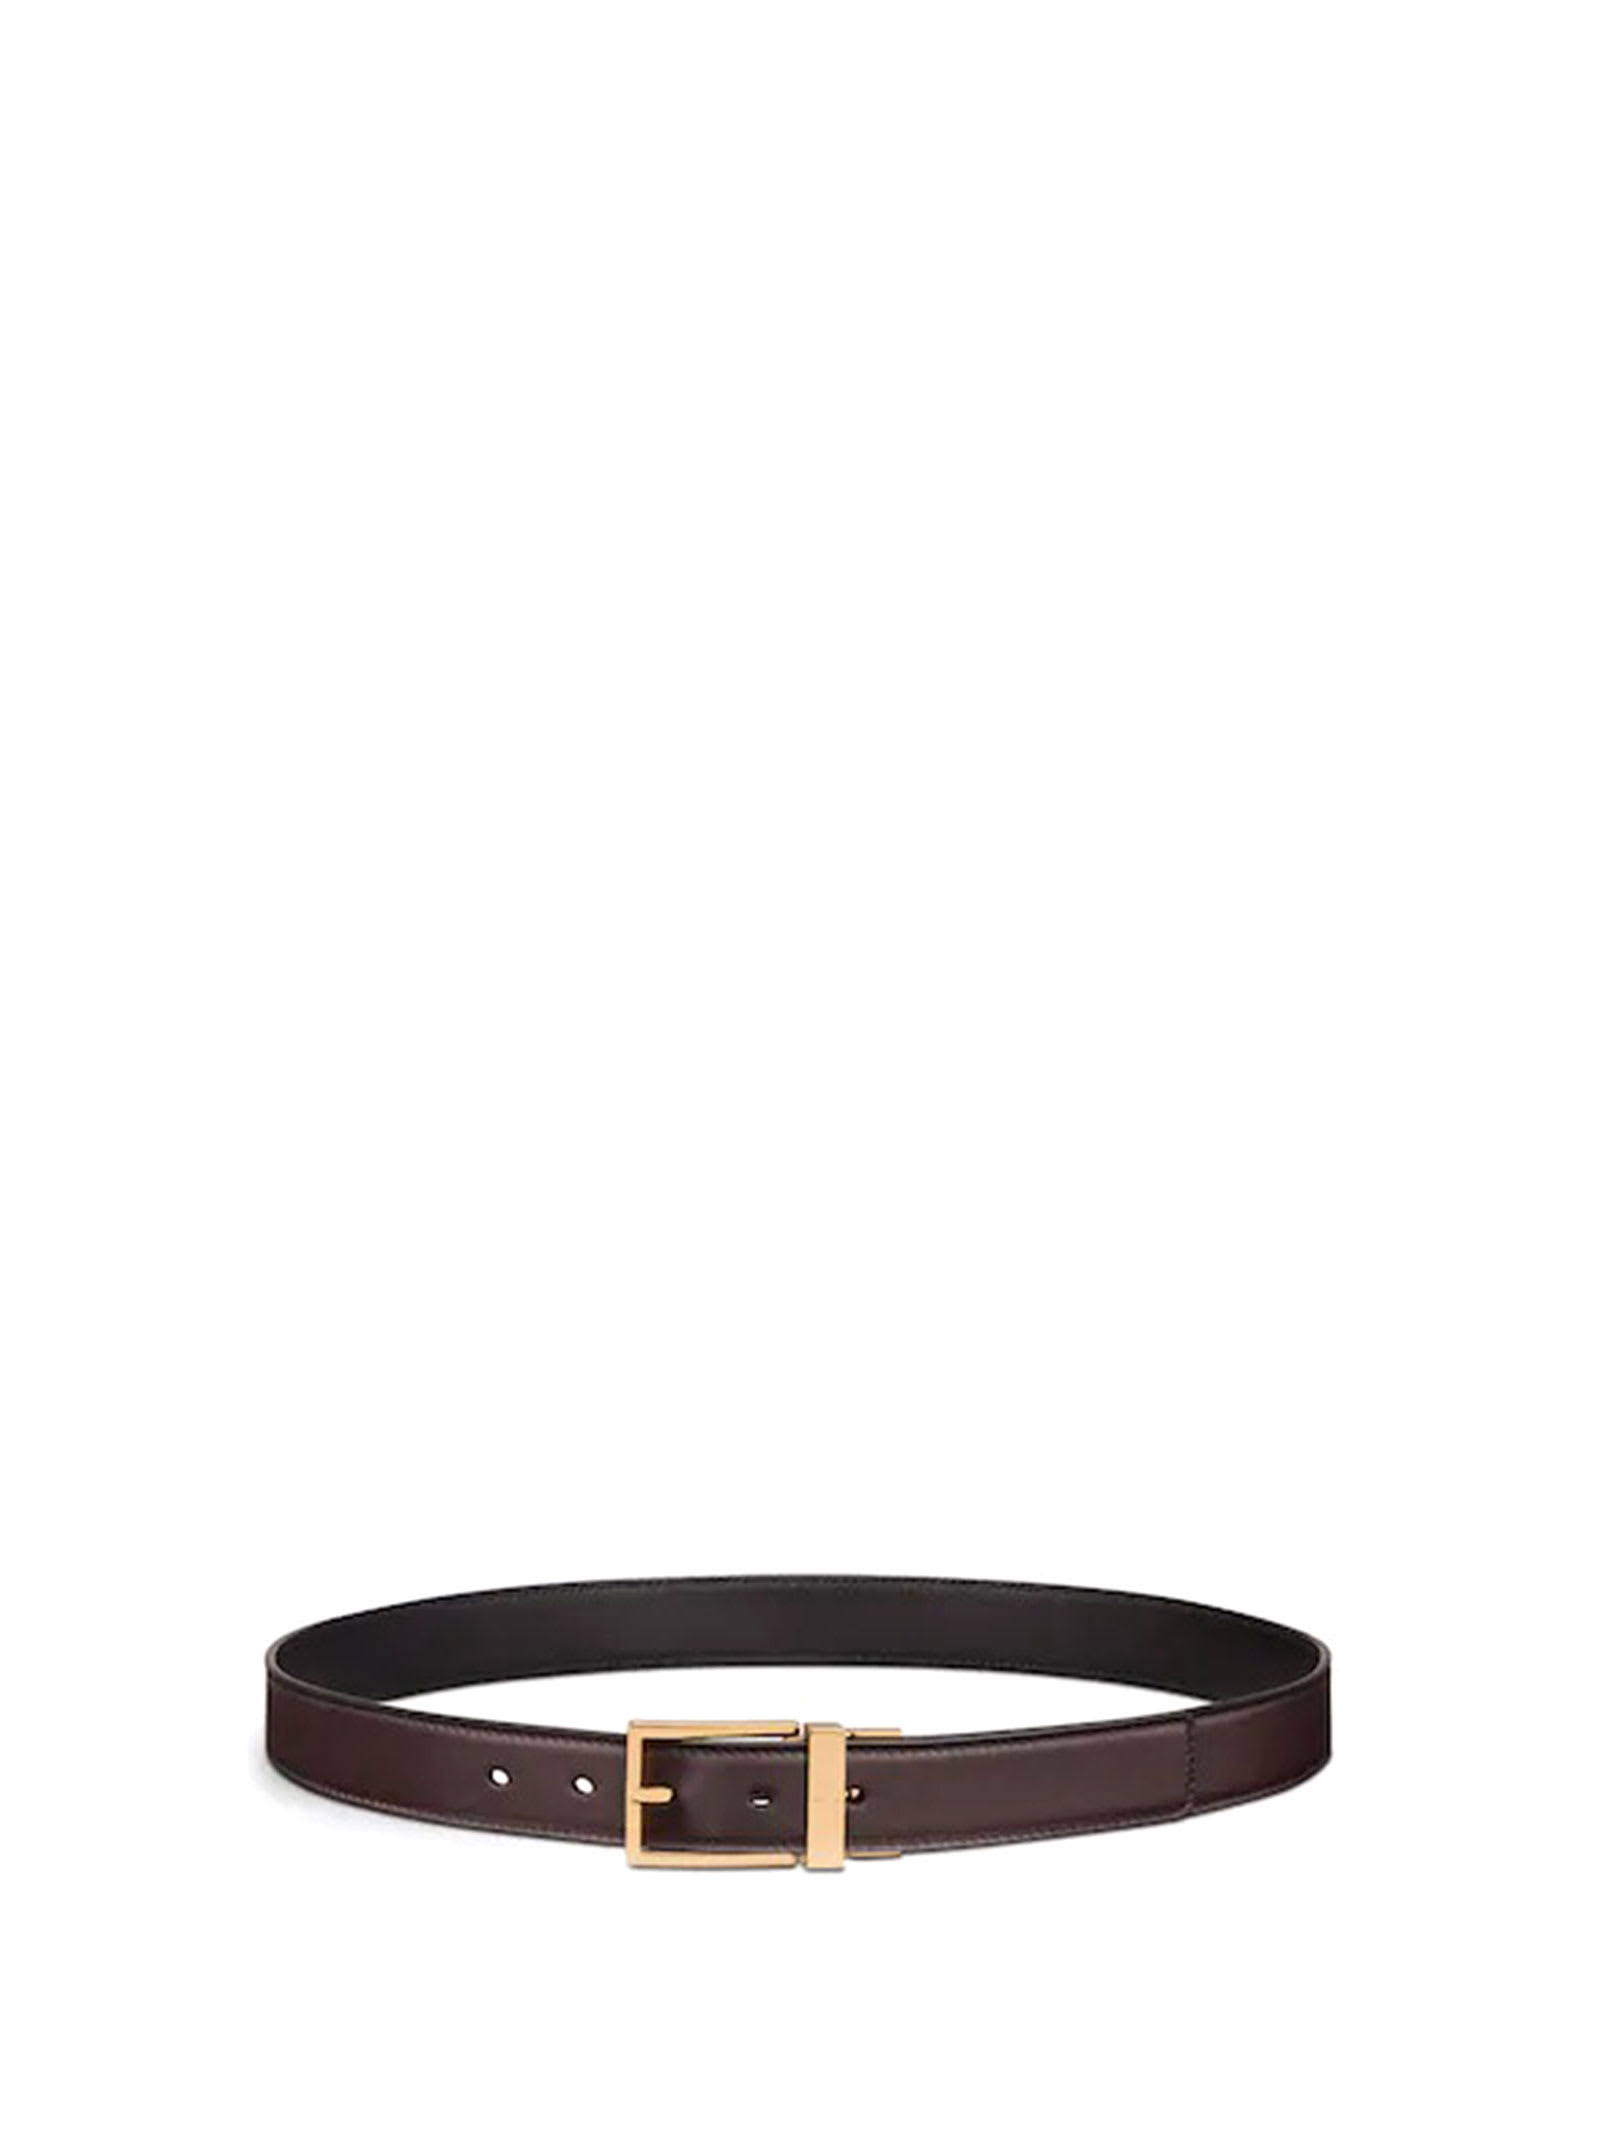 Dior Homme Two-tone Leather Belt